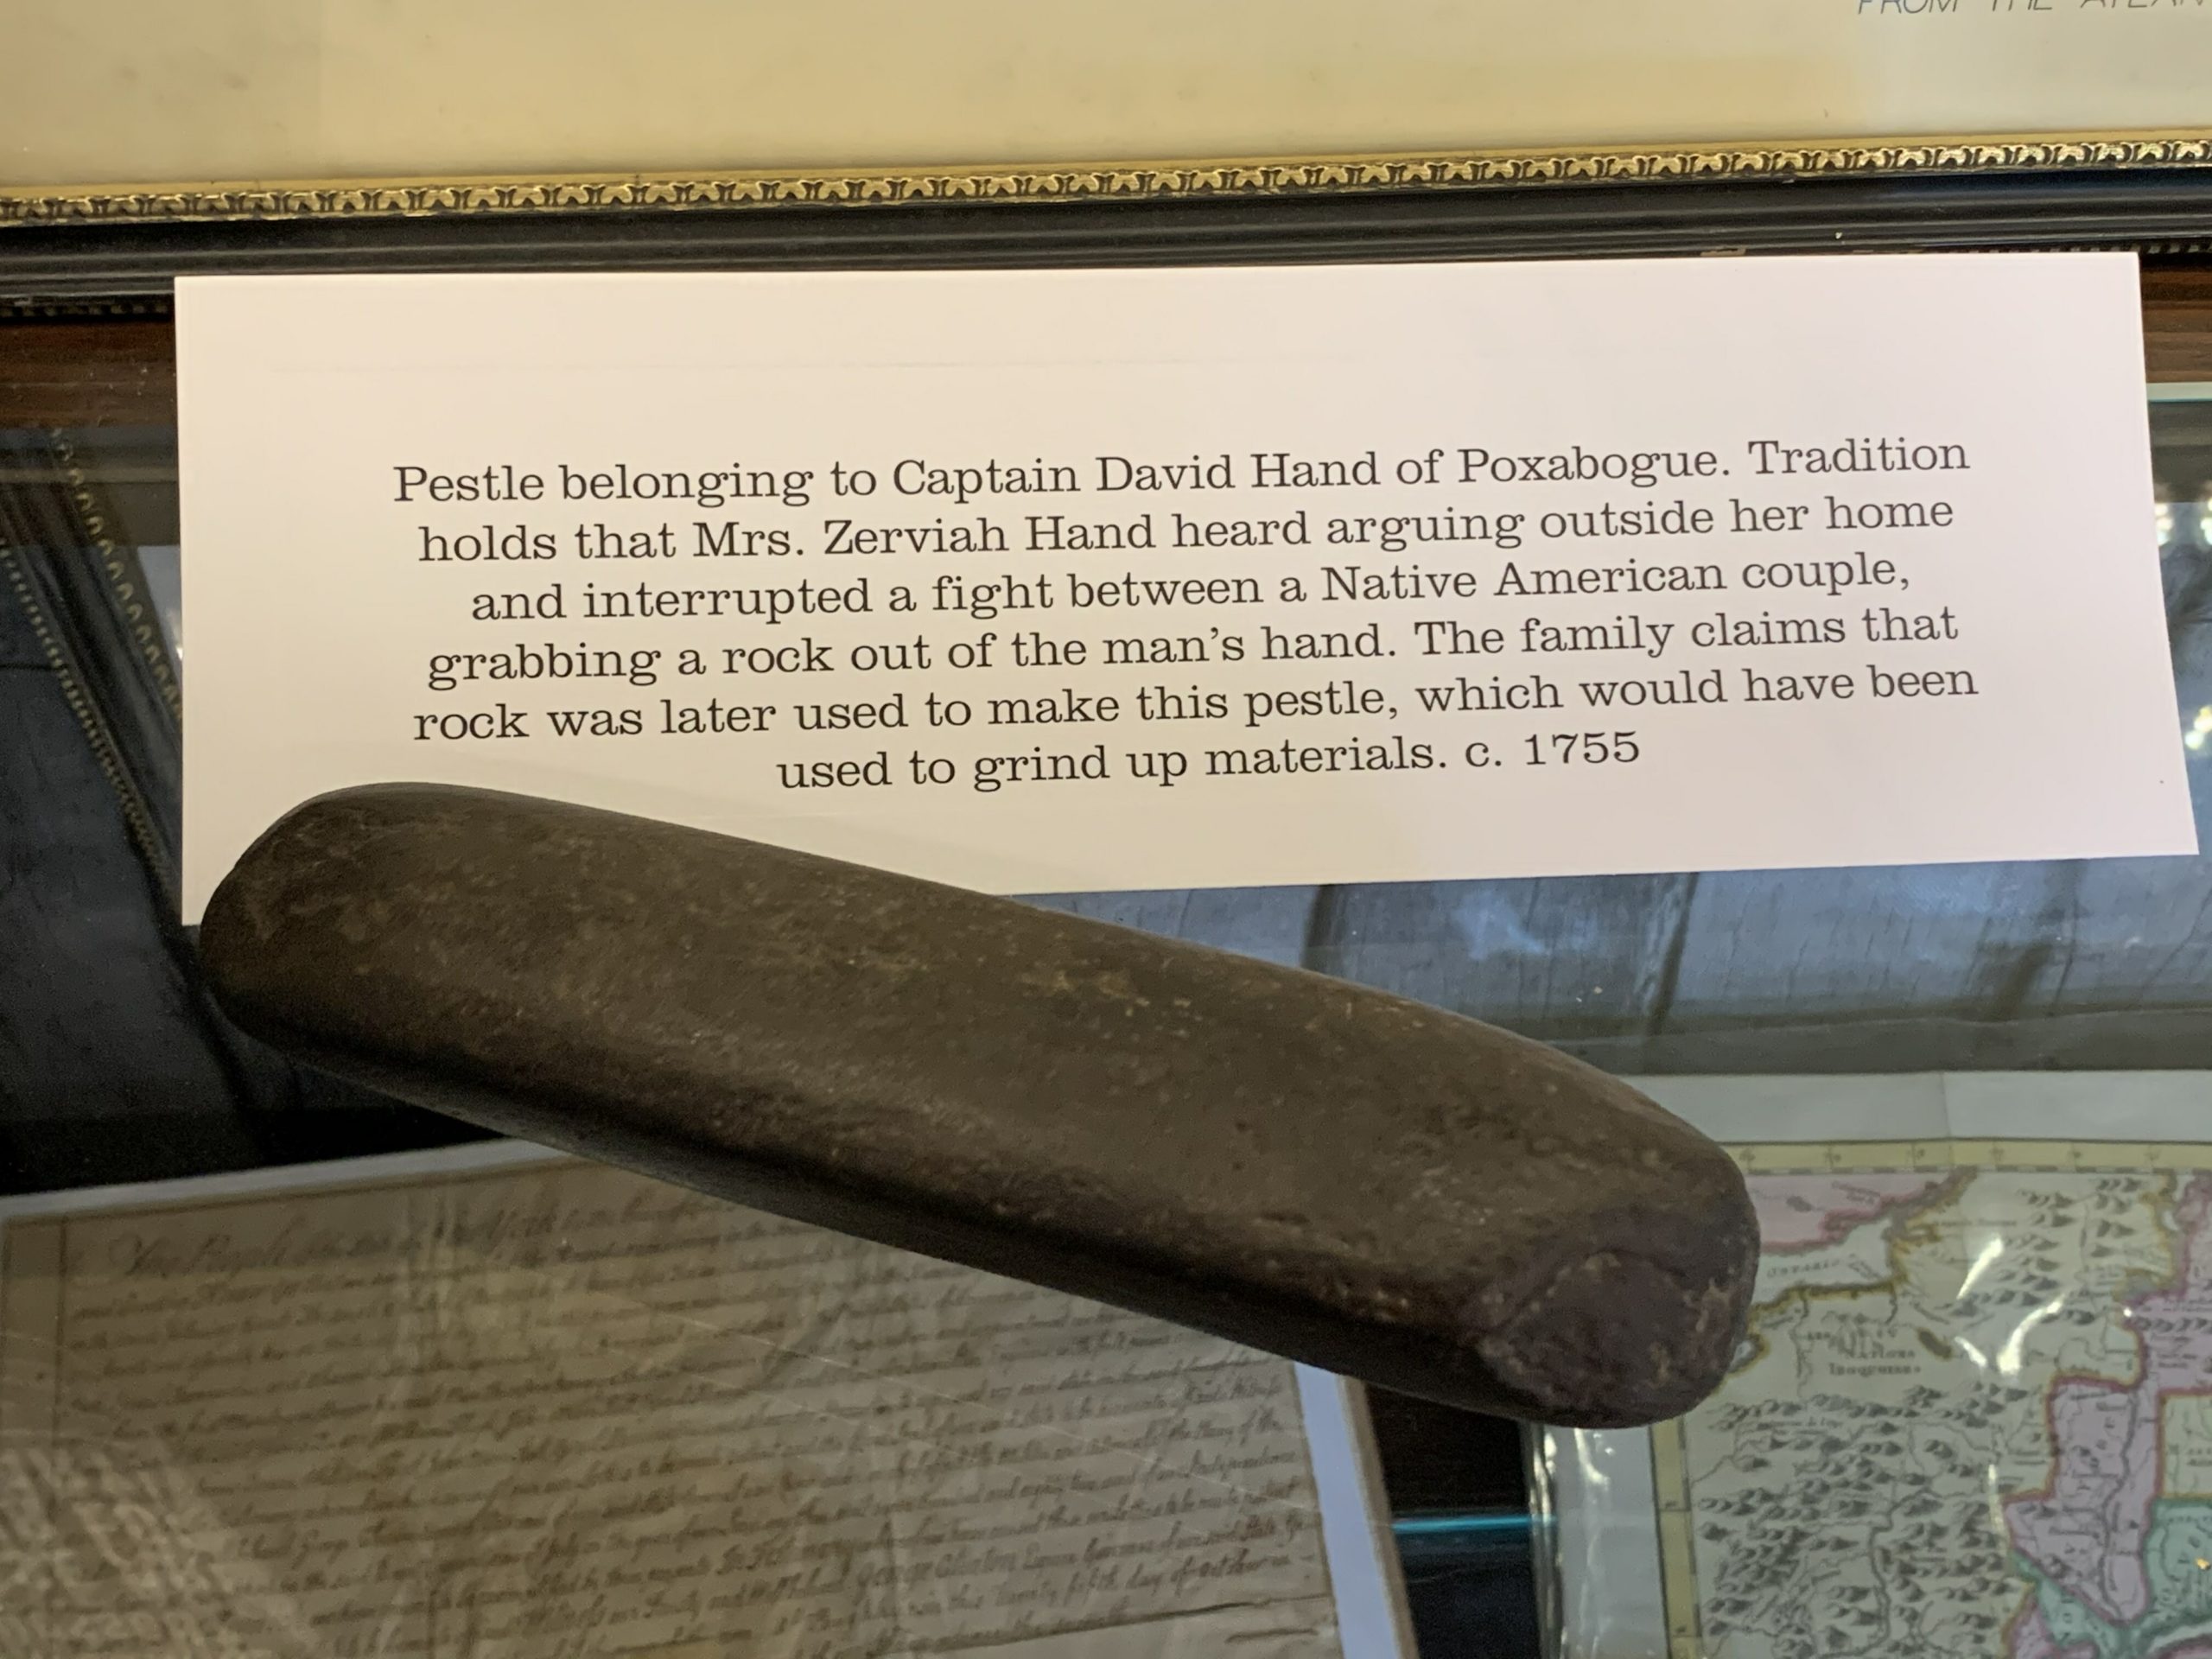 Zerviah Hand's pestle is connected to an 18th century Poxabogue domestic dispute.